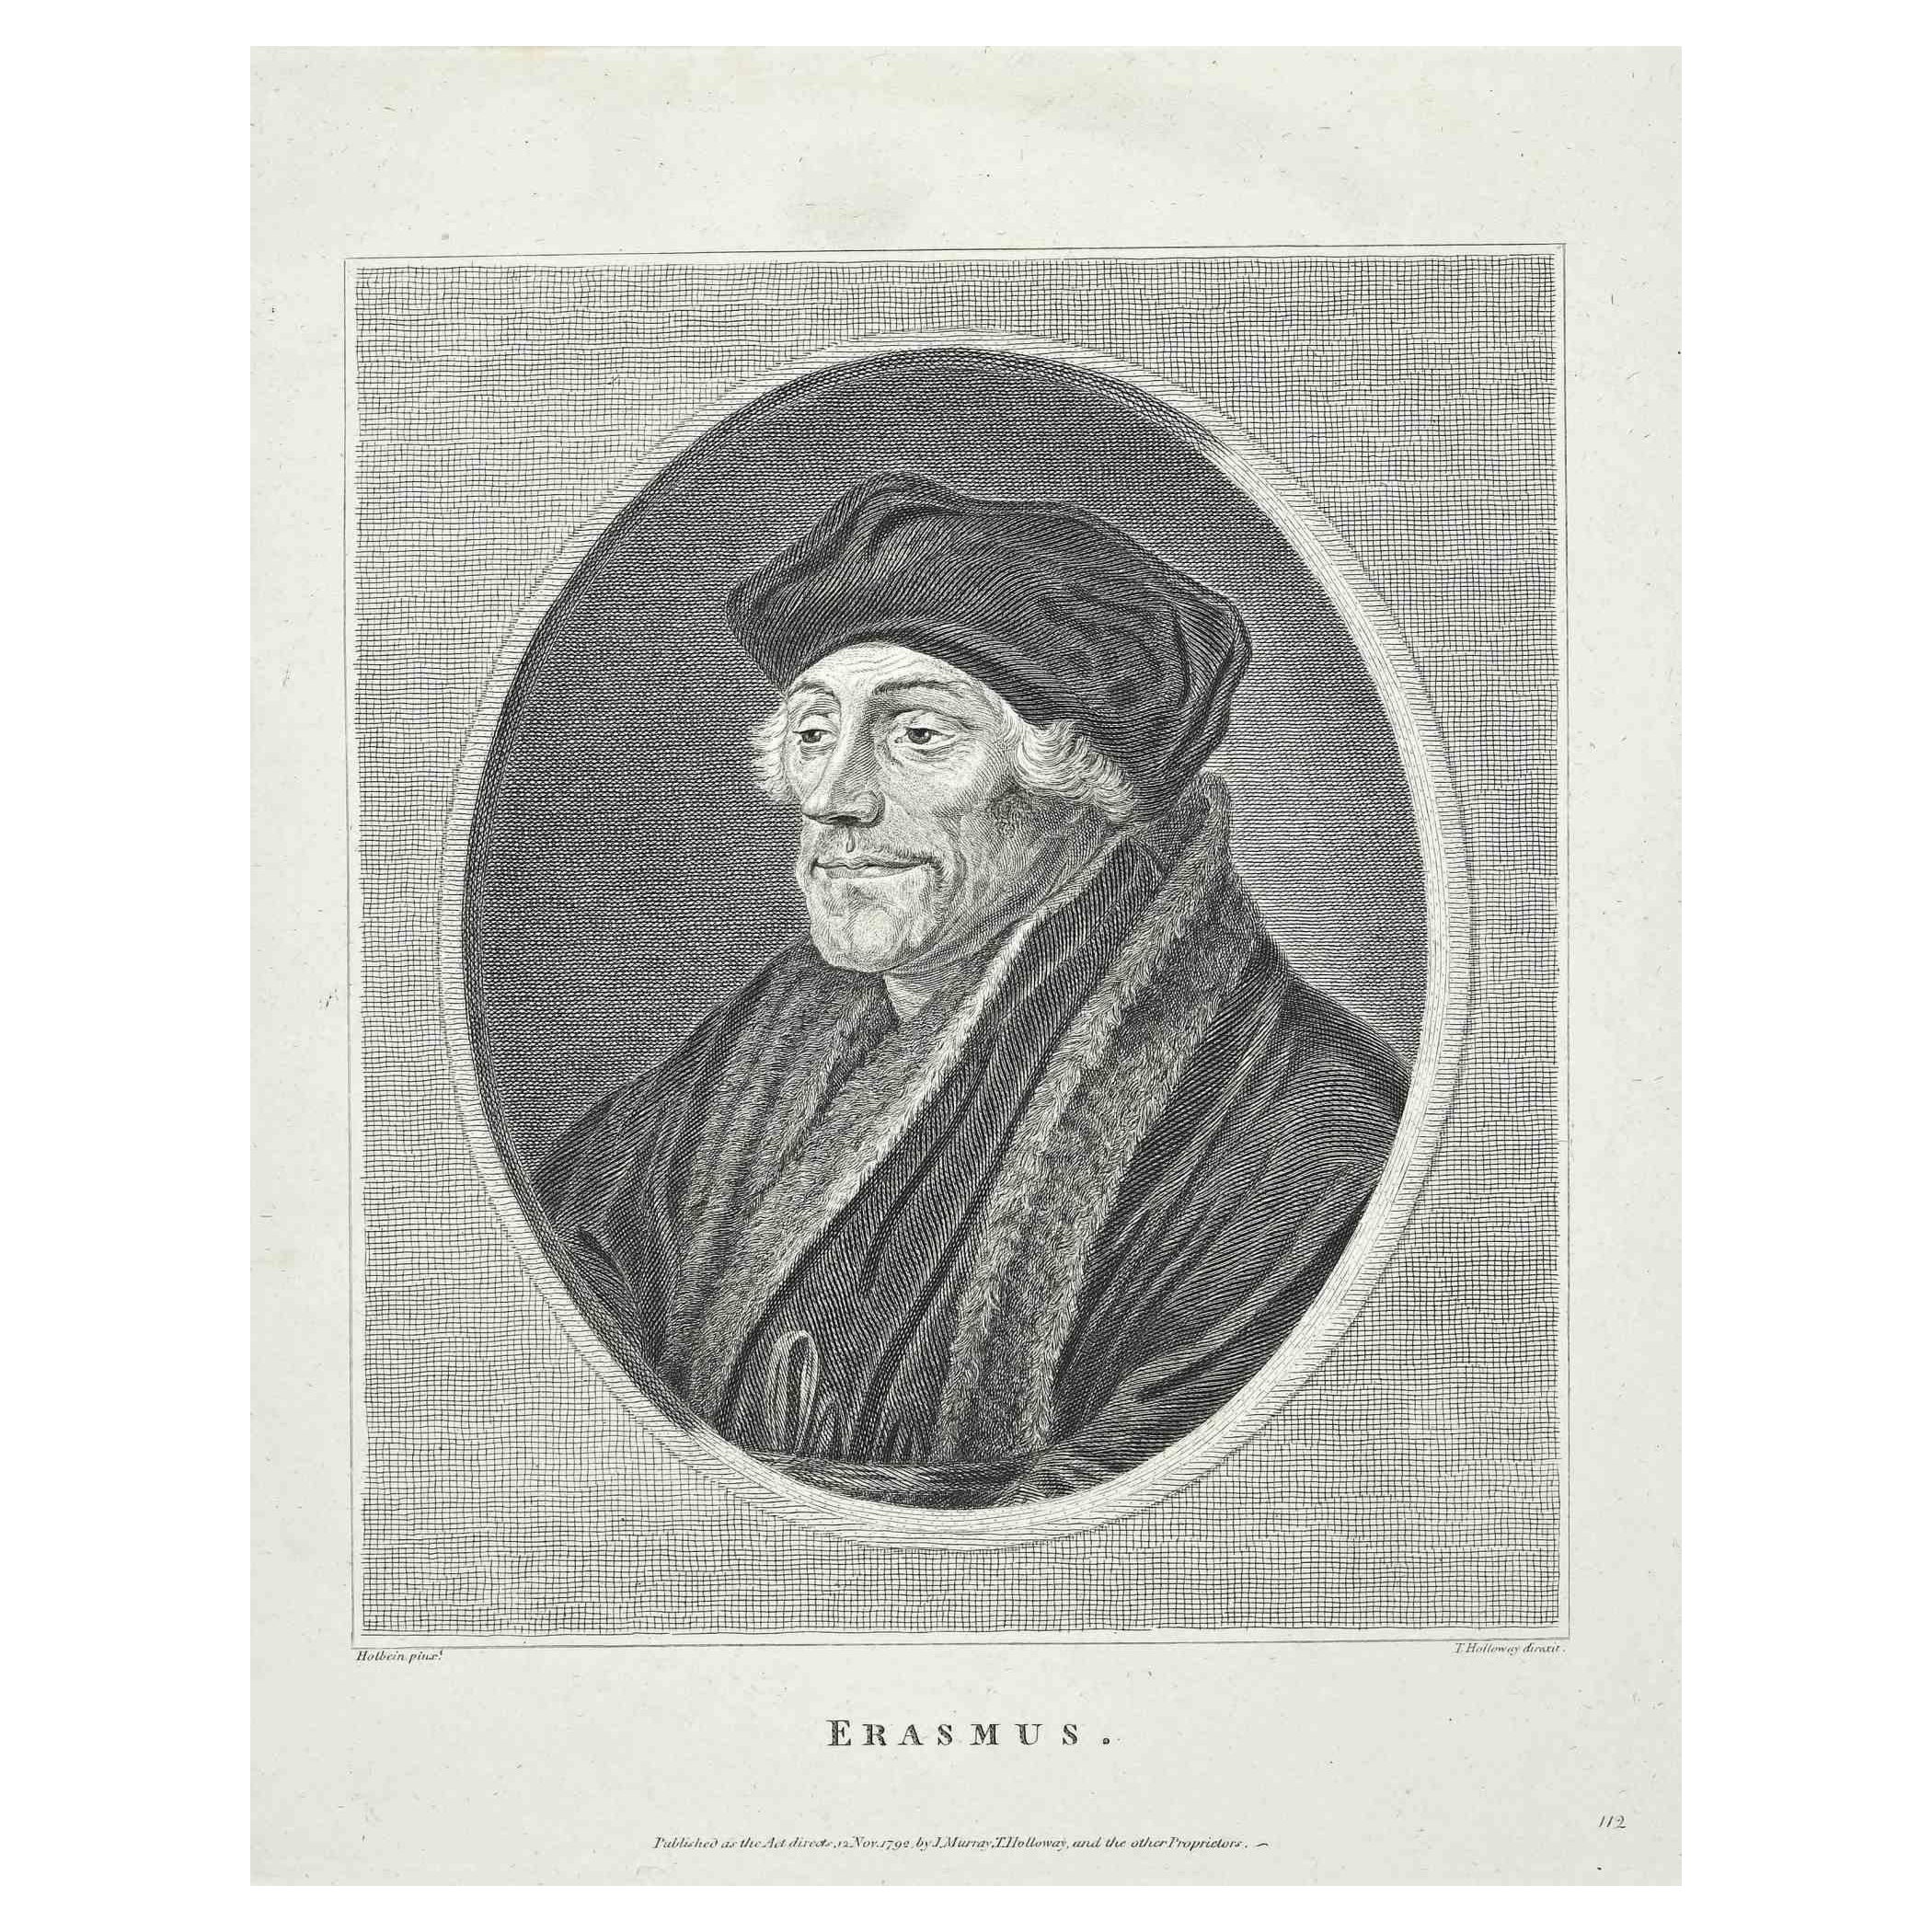 Portrait of Erasmusis an original etching artwork realized by Thomas Holloway for Johann Caspar Lavater's "Essays on Physiognomy, Designed to Promote the Knowledge and the Love of Mankind", London, Bensley, 1810. 

Signed on the plate.

Titled on